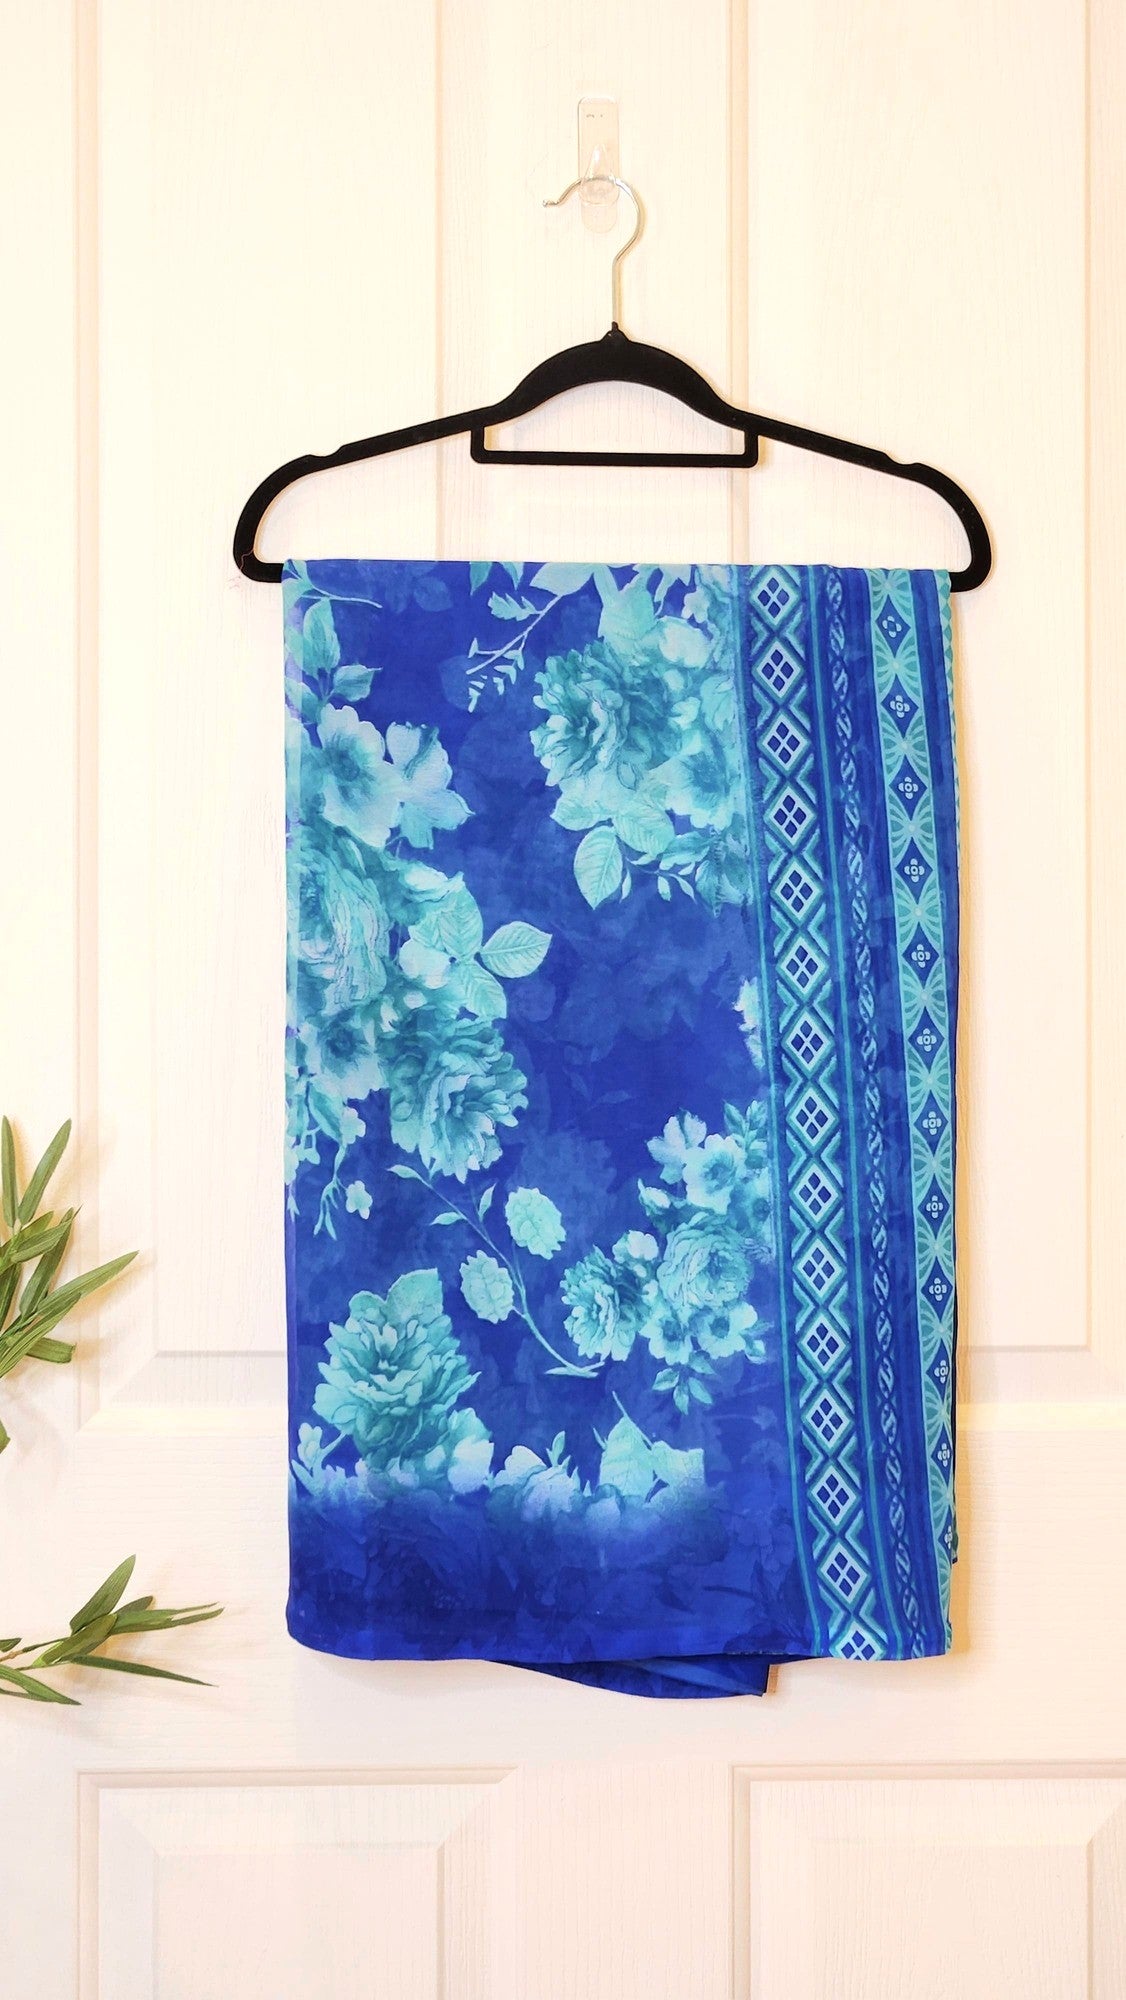 Chiffon Floral Saree in Dark Blue with Mixed Color Palette Daisy